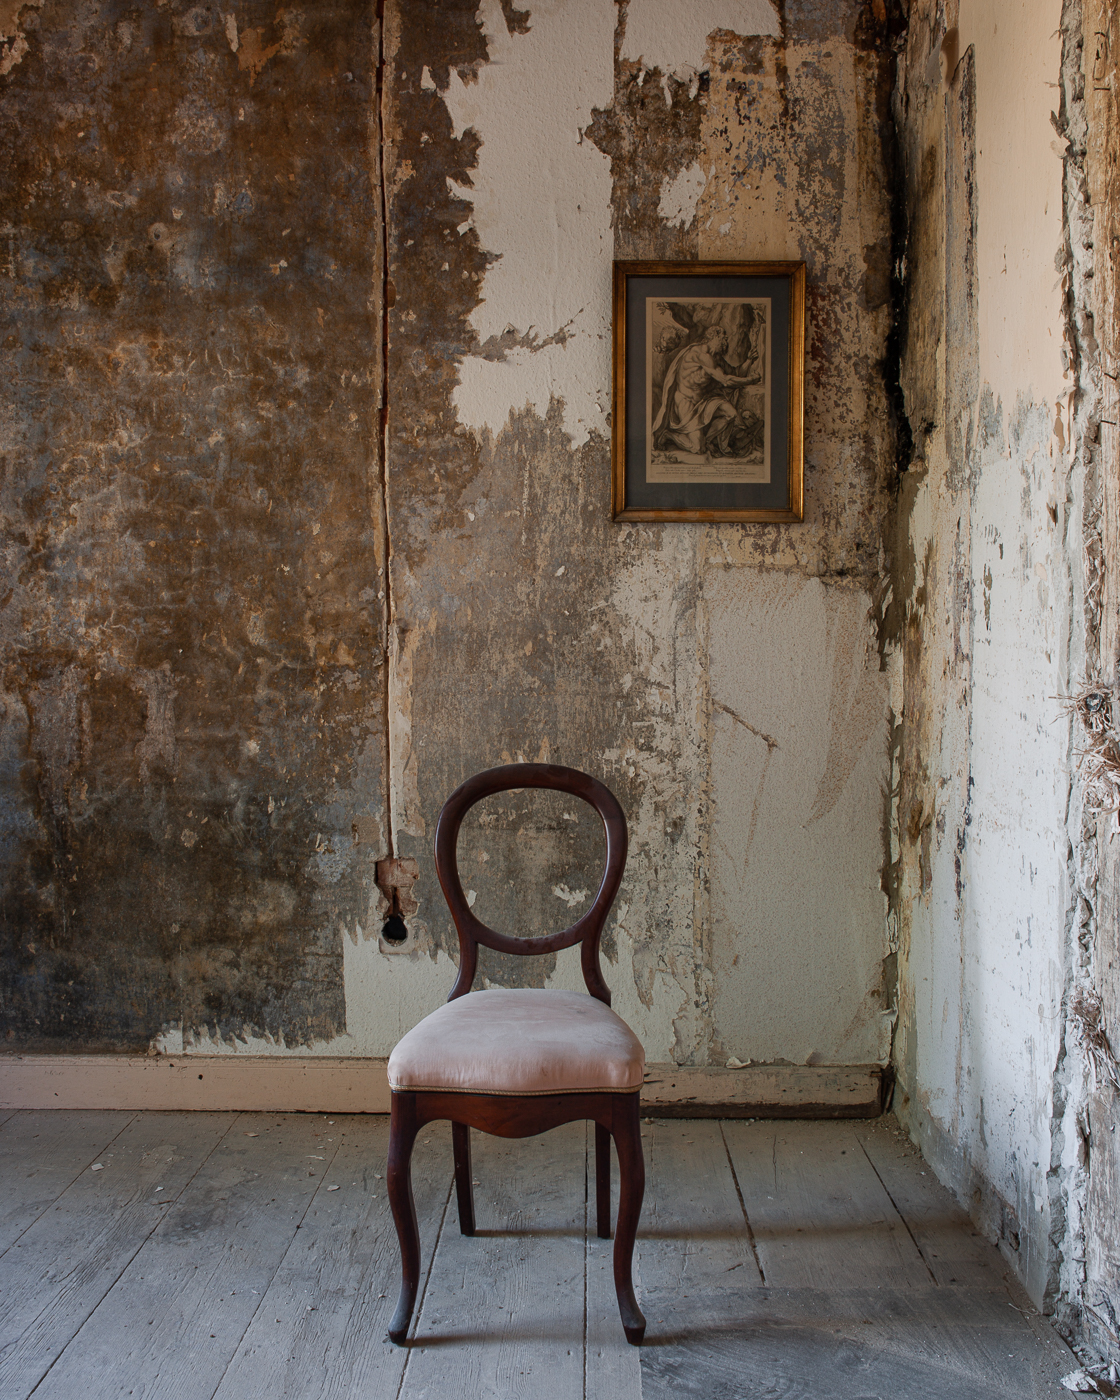 A single chair in an abandonned room